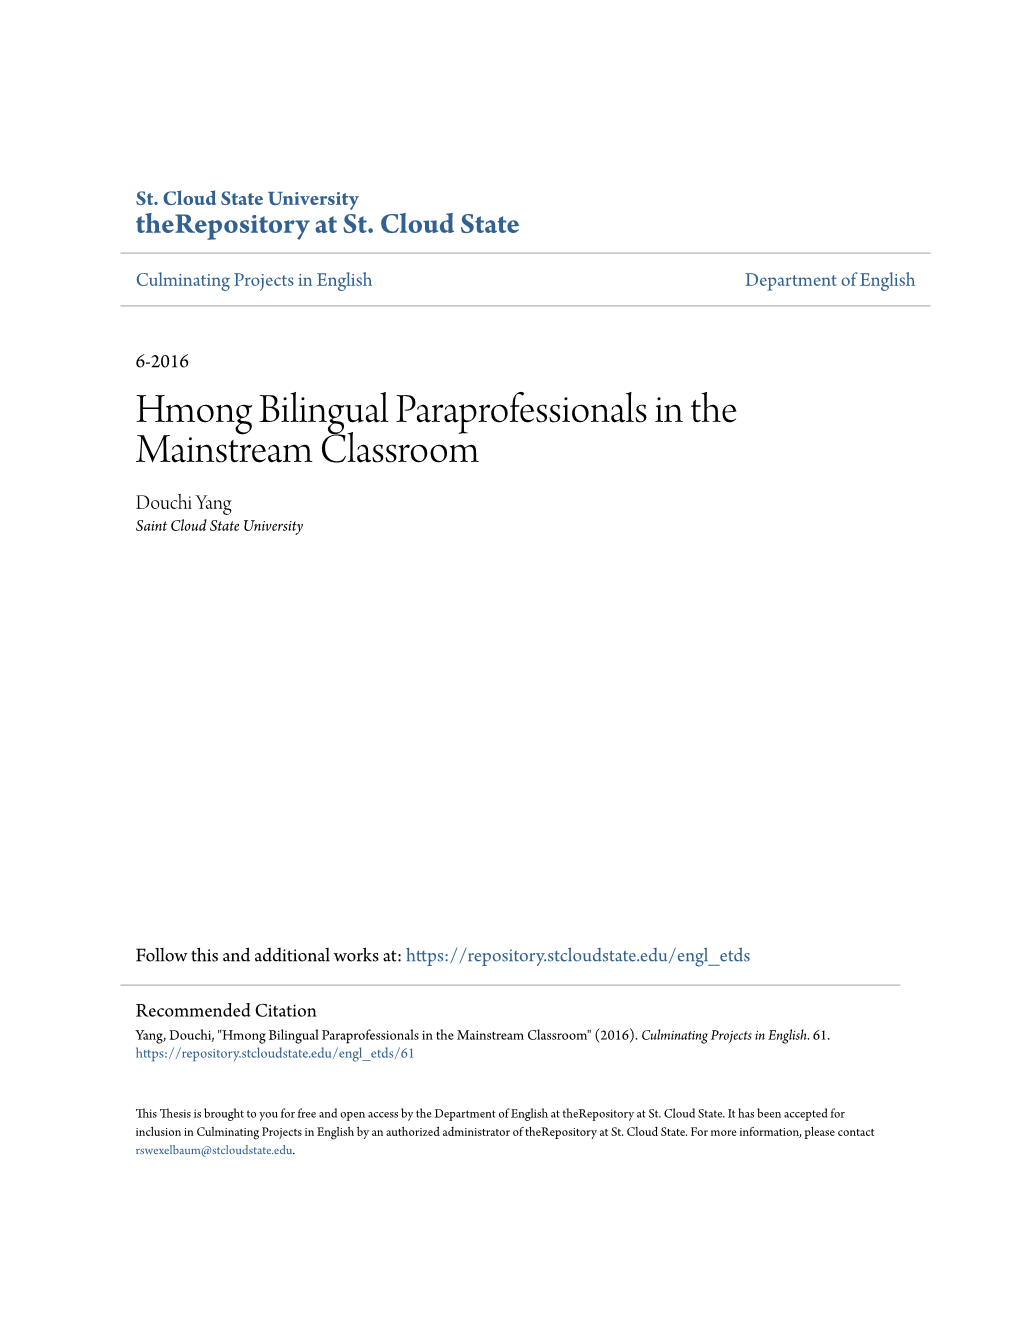 Hmong Bilingual Paraprofessionals in the Mainstream Classroom Douchi Yang Saint Cloud State University